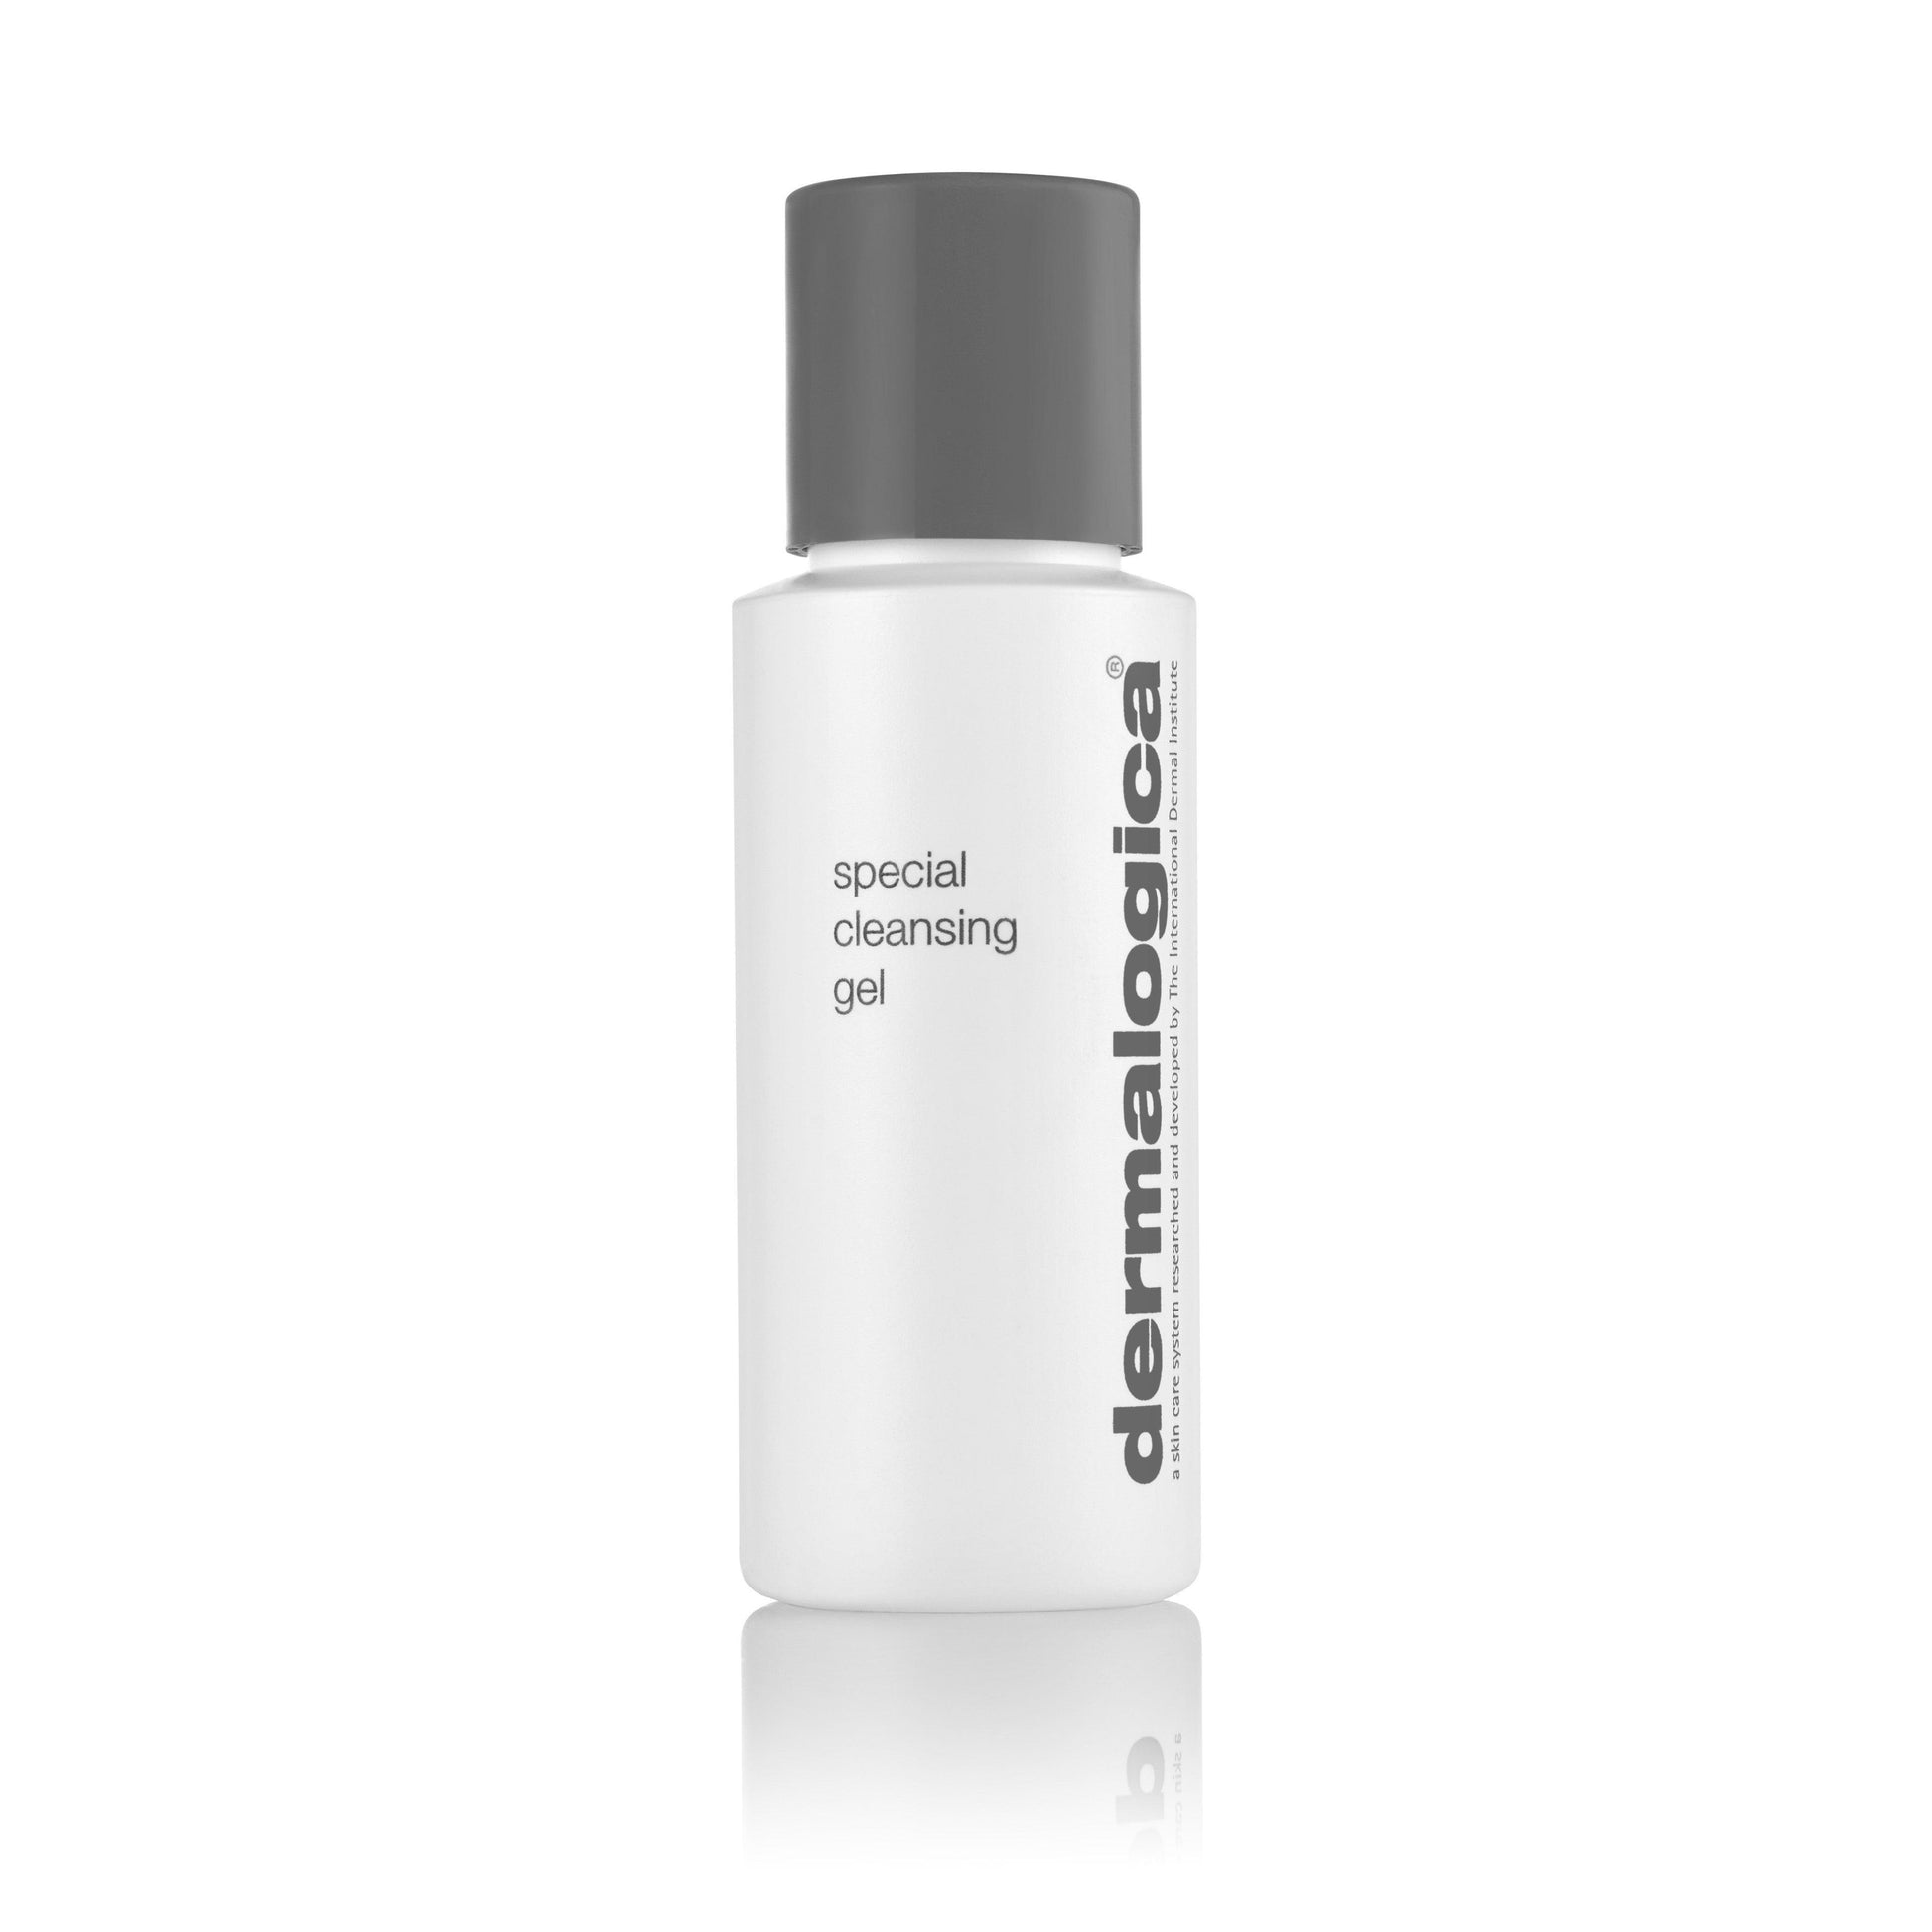 special cleansing gel 50ml (gift, not for sale) - Dermalogica Hong Kong